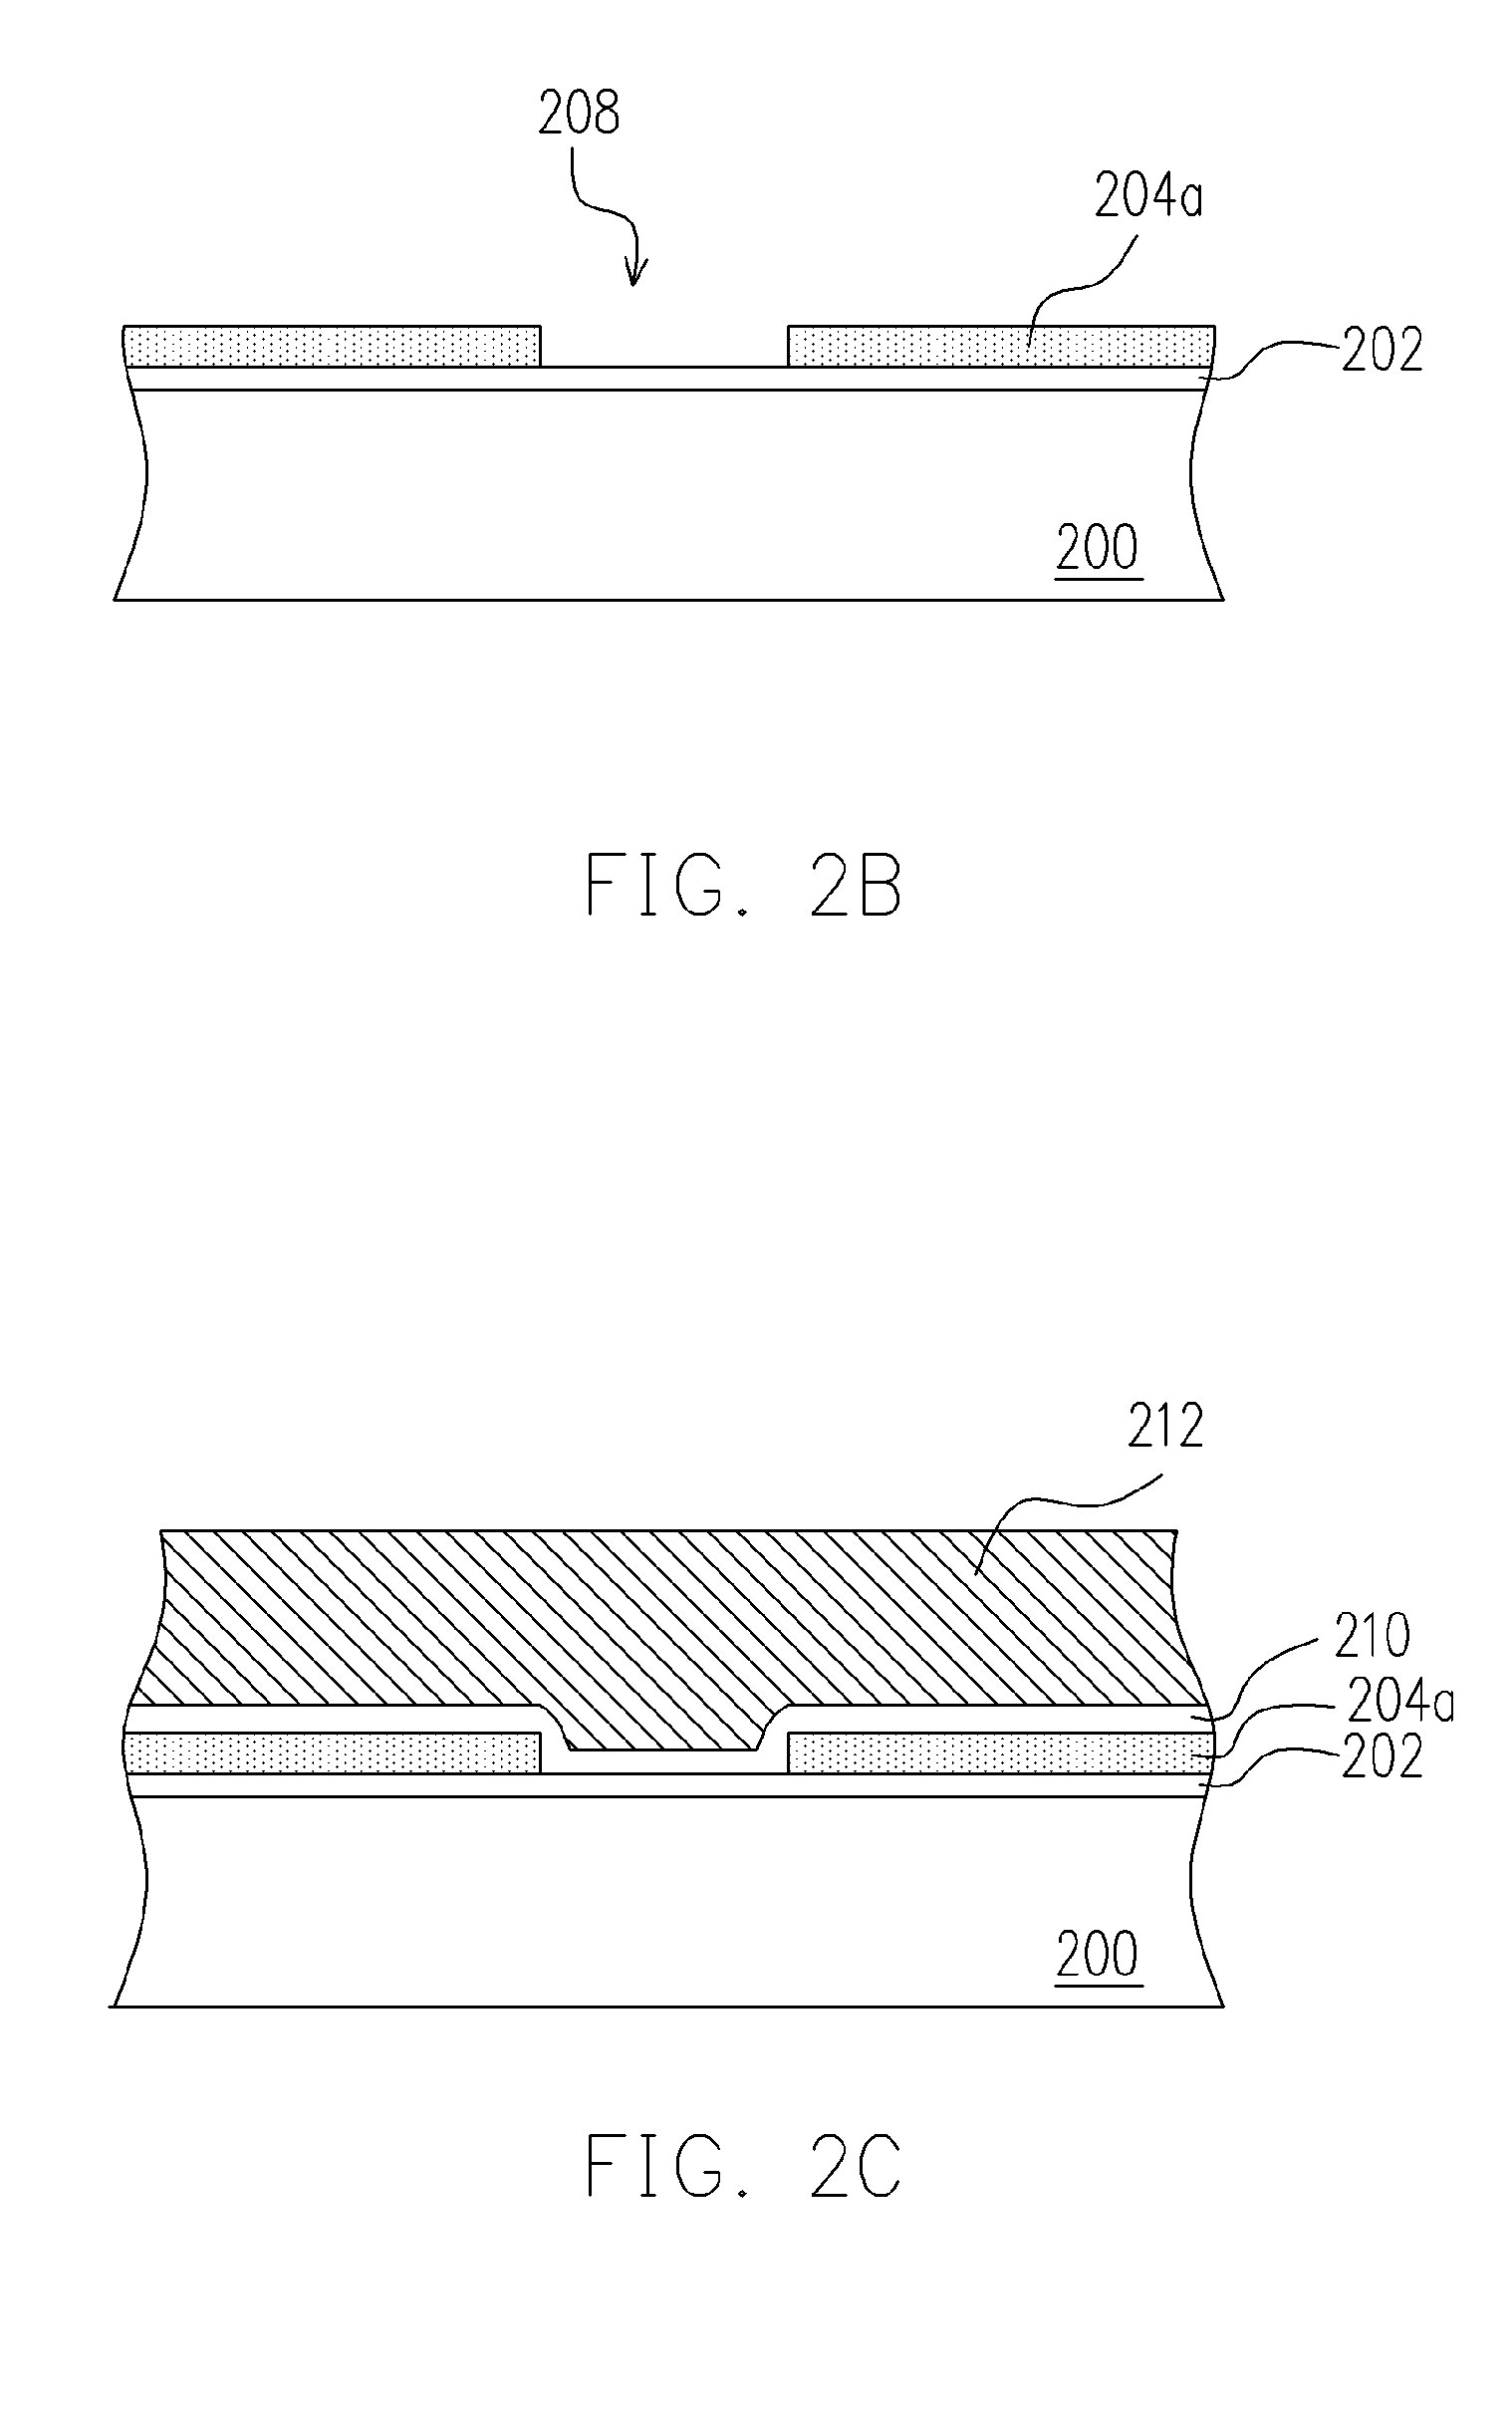 Method of fabricating non-volatile memory cell adapted for integration of devices and for multiple read/write operations